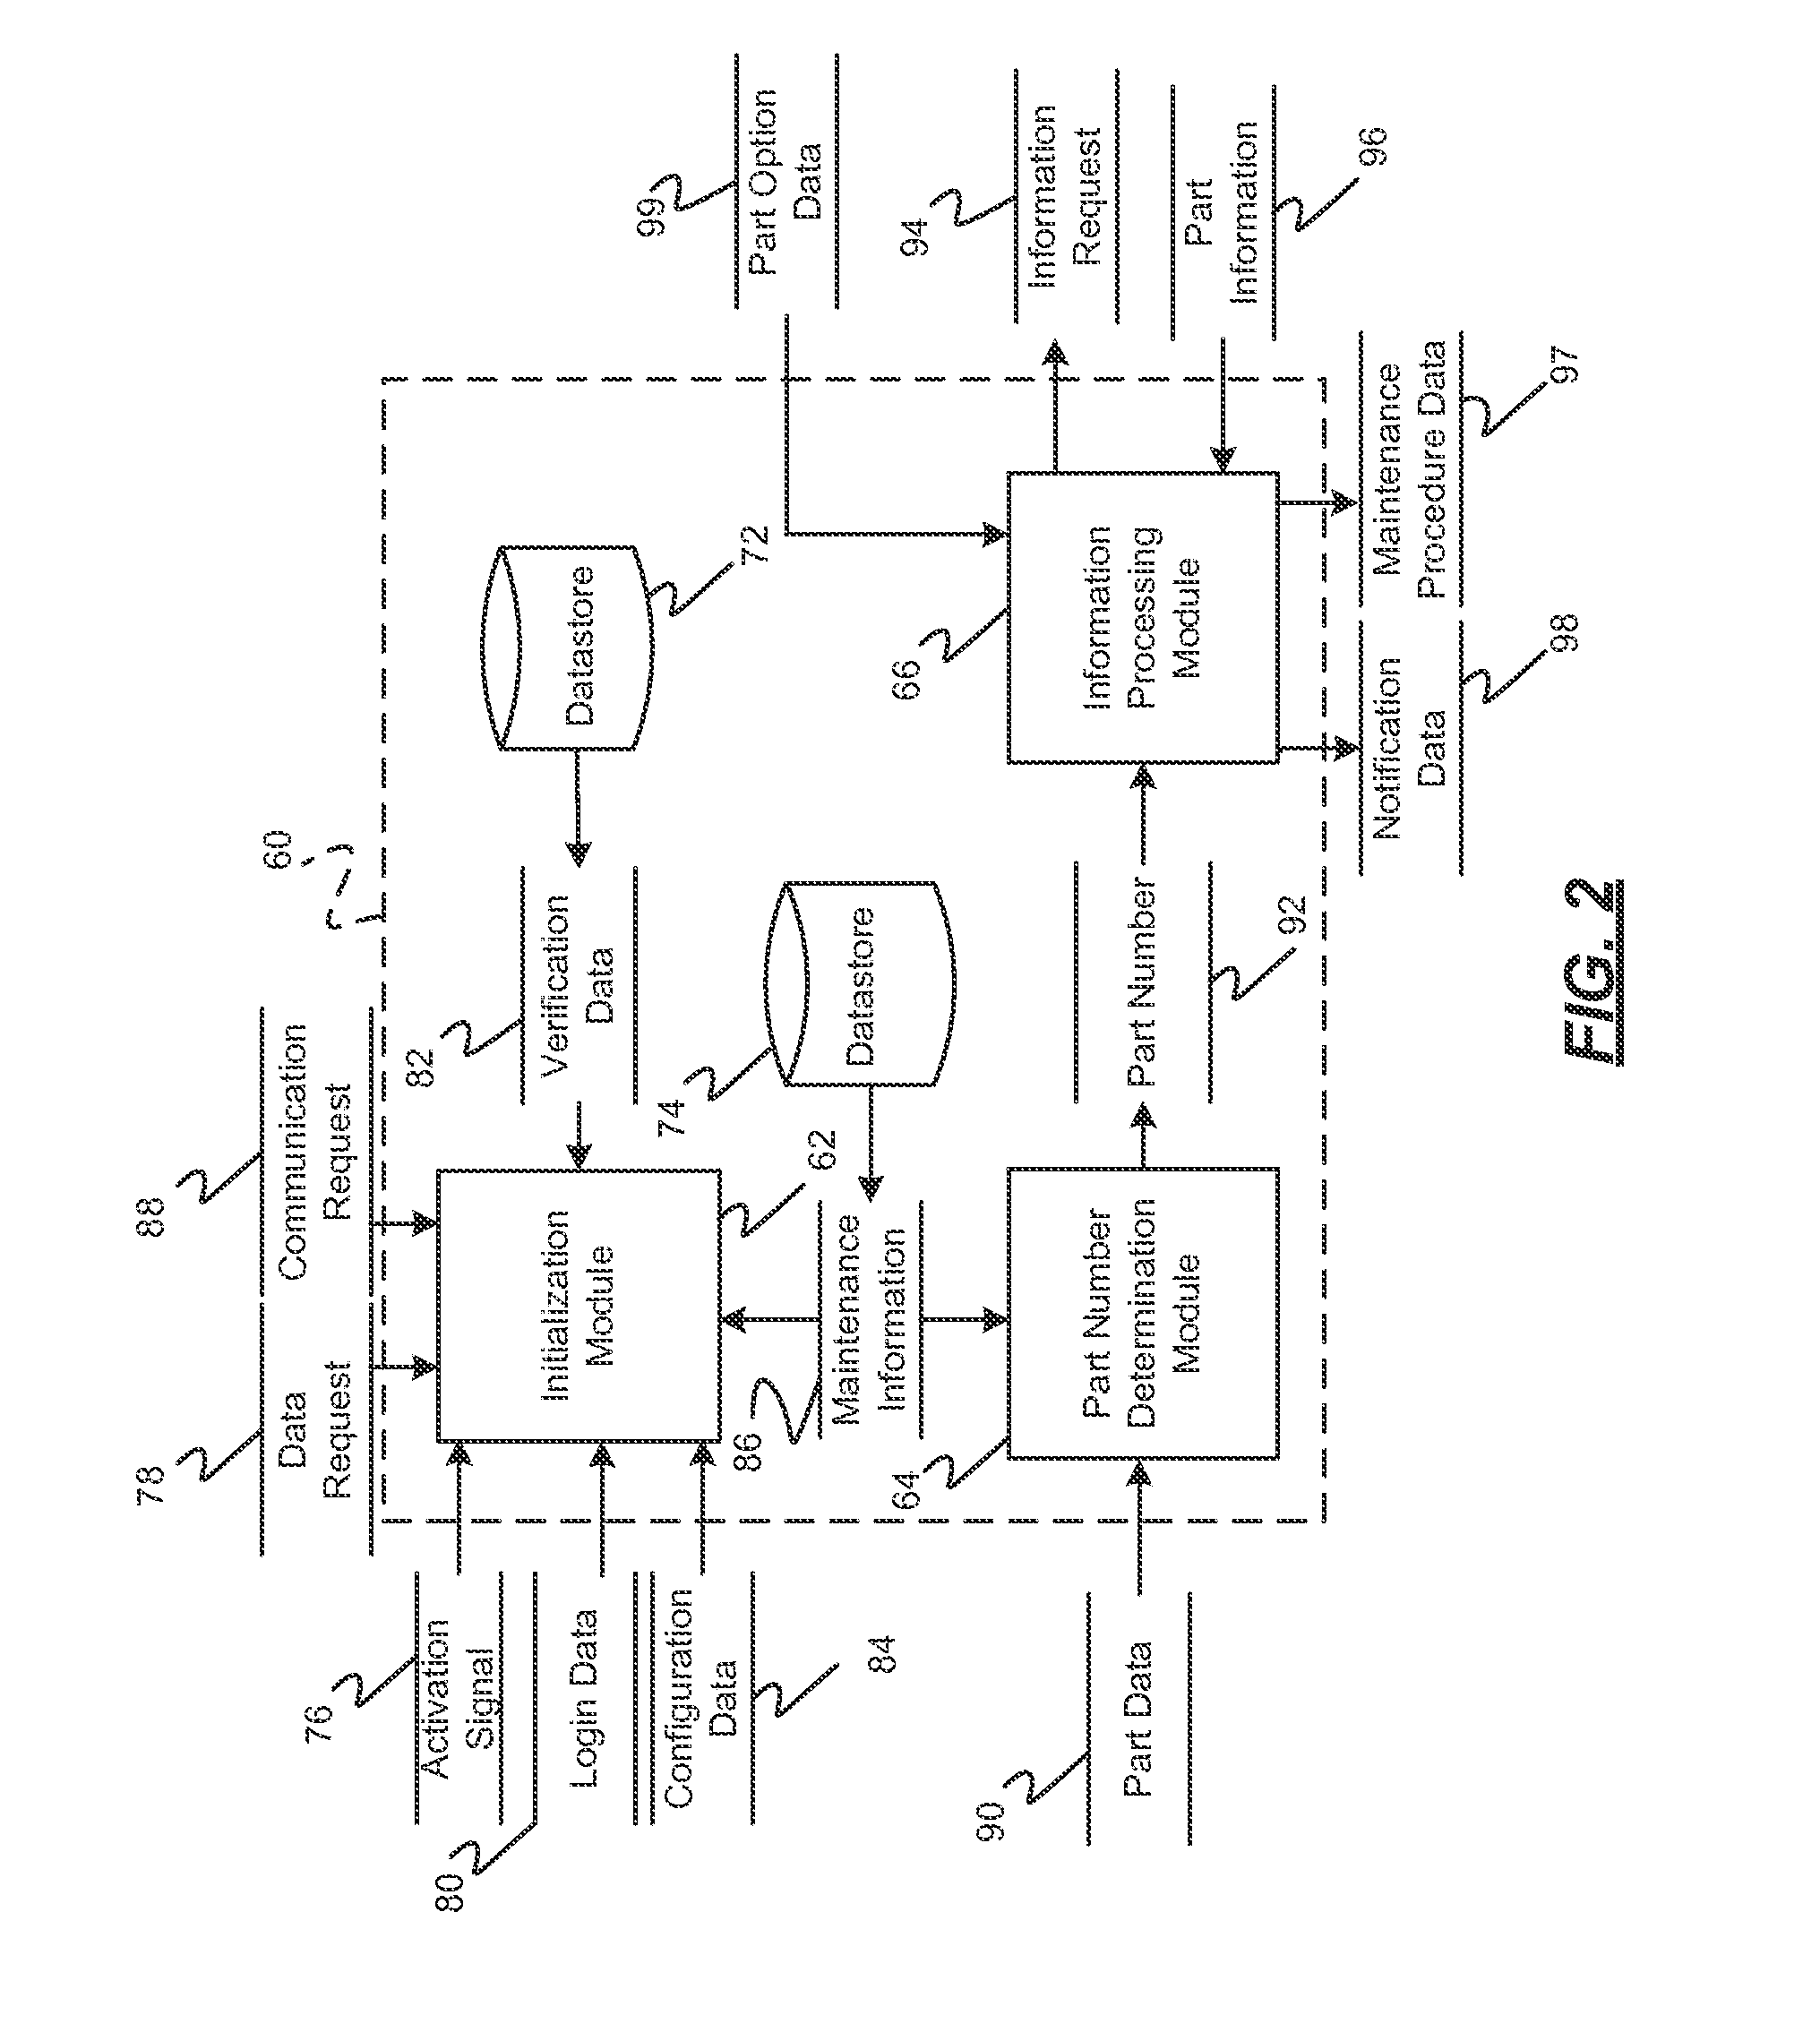 Aircraft maintenance systems and methods using wearable device